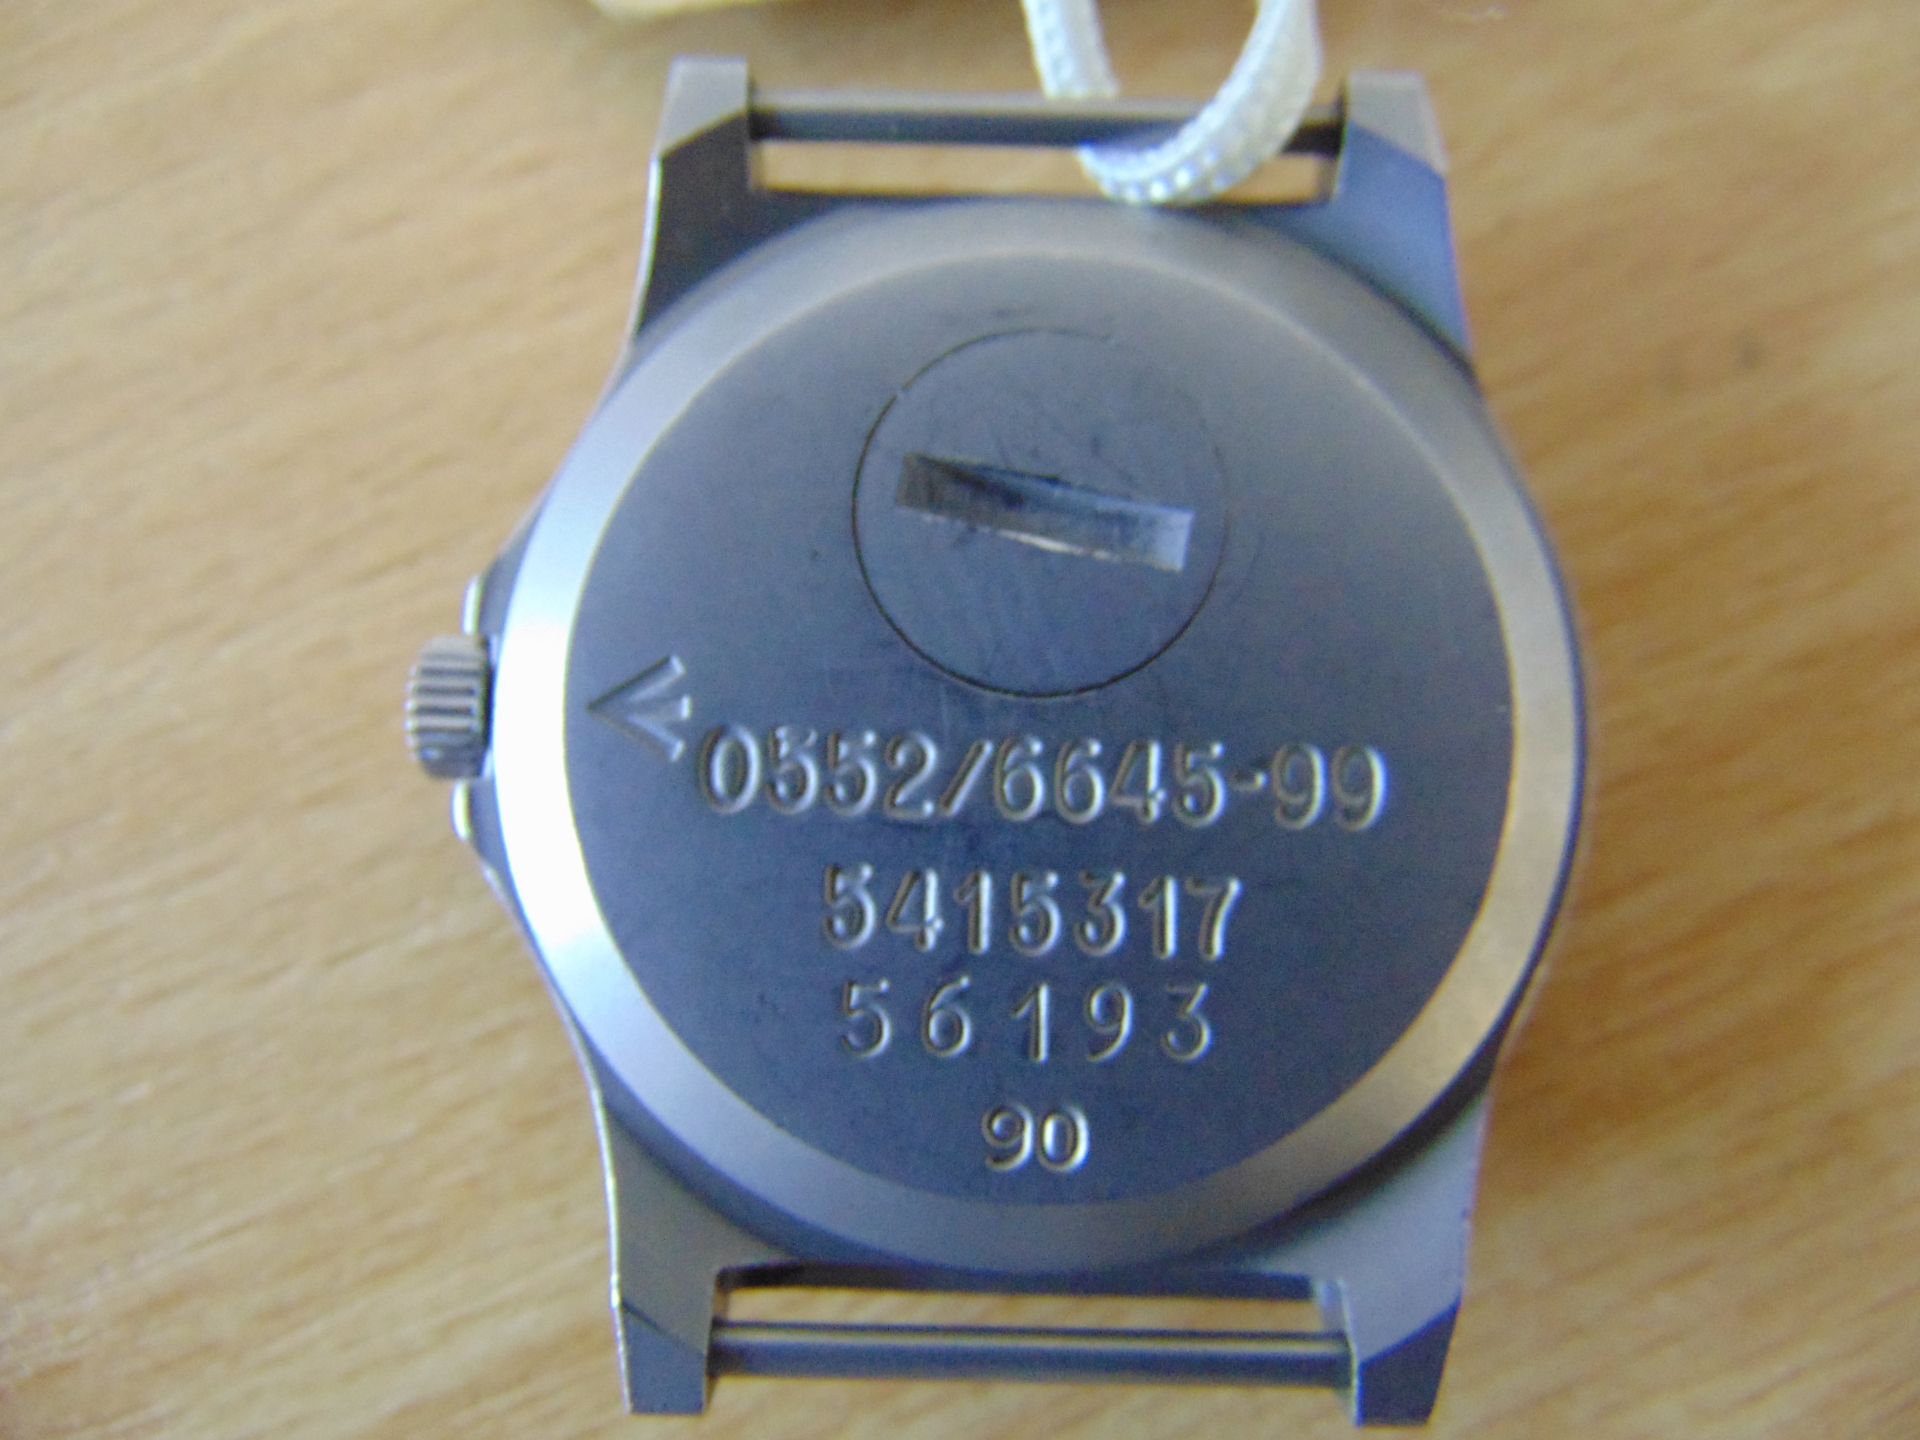 CWC 0552 ROYAL MARINES/ NAVY ISSUE SERVICE WATCH NATO MARKS DATE 1990 GULF WAR I - Image 3 of 6